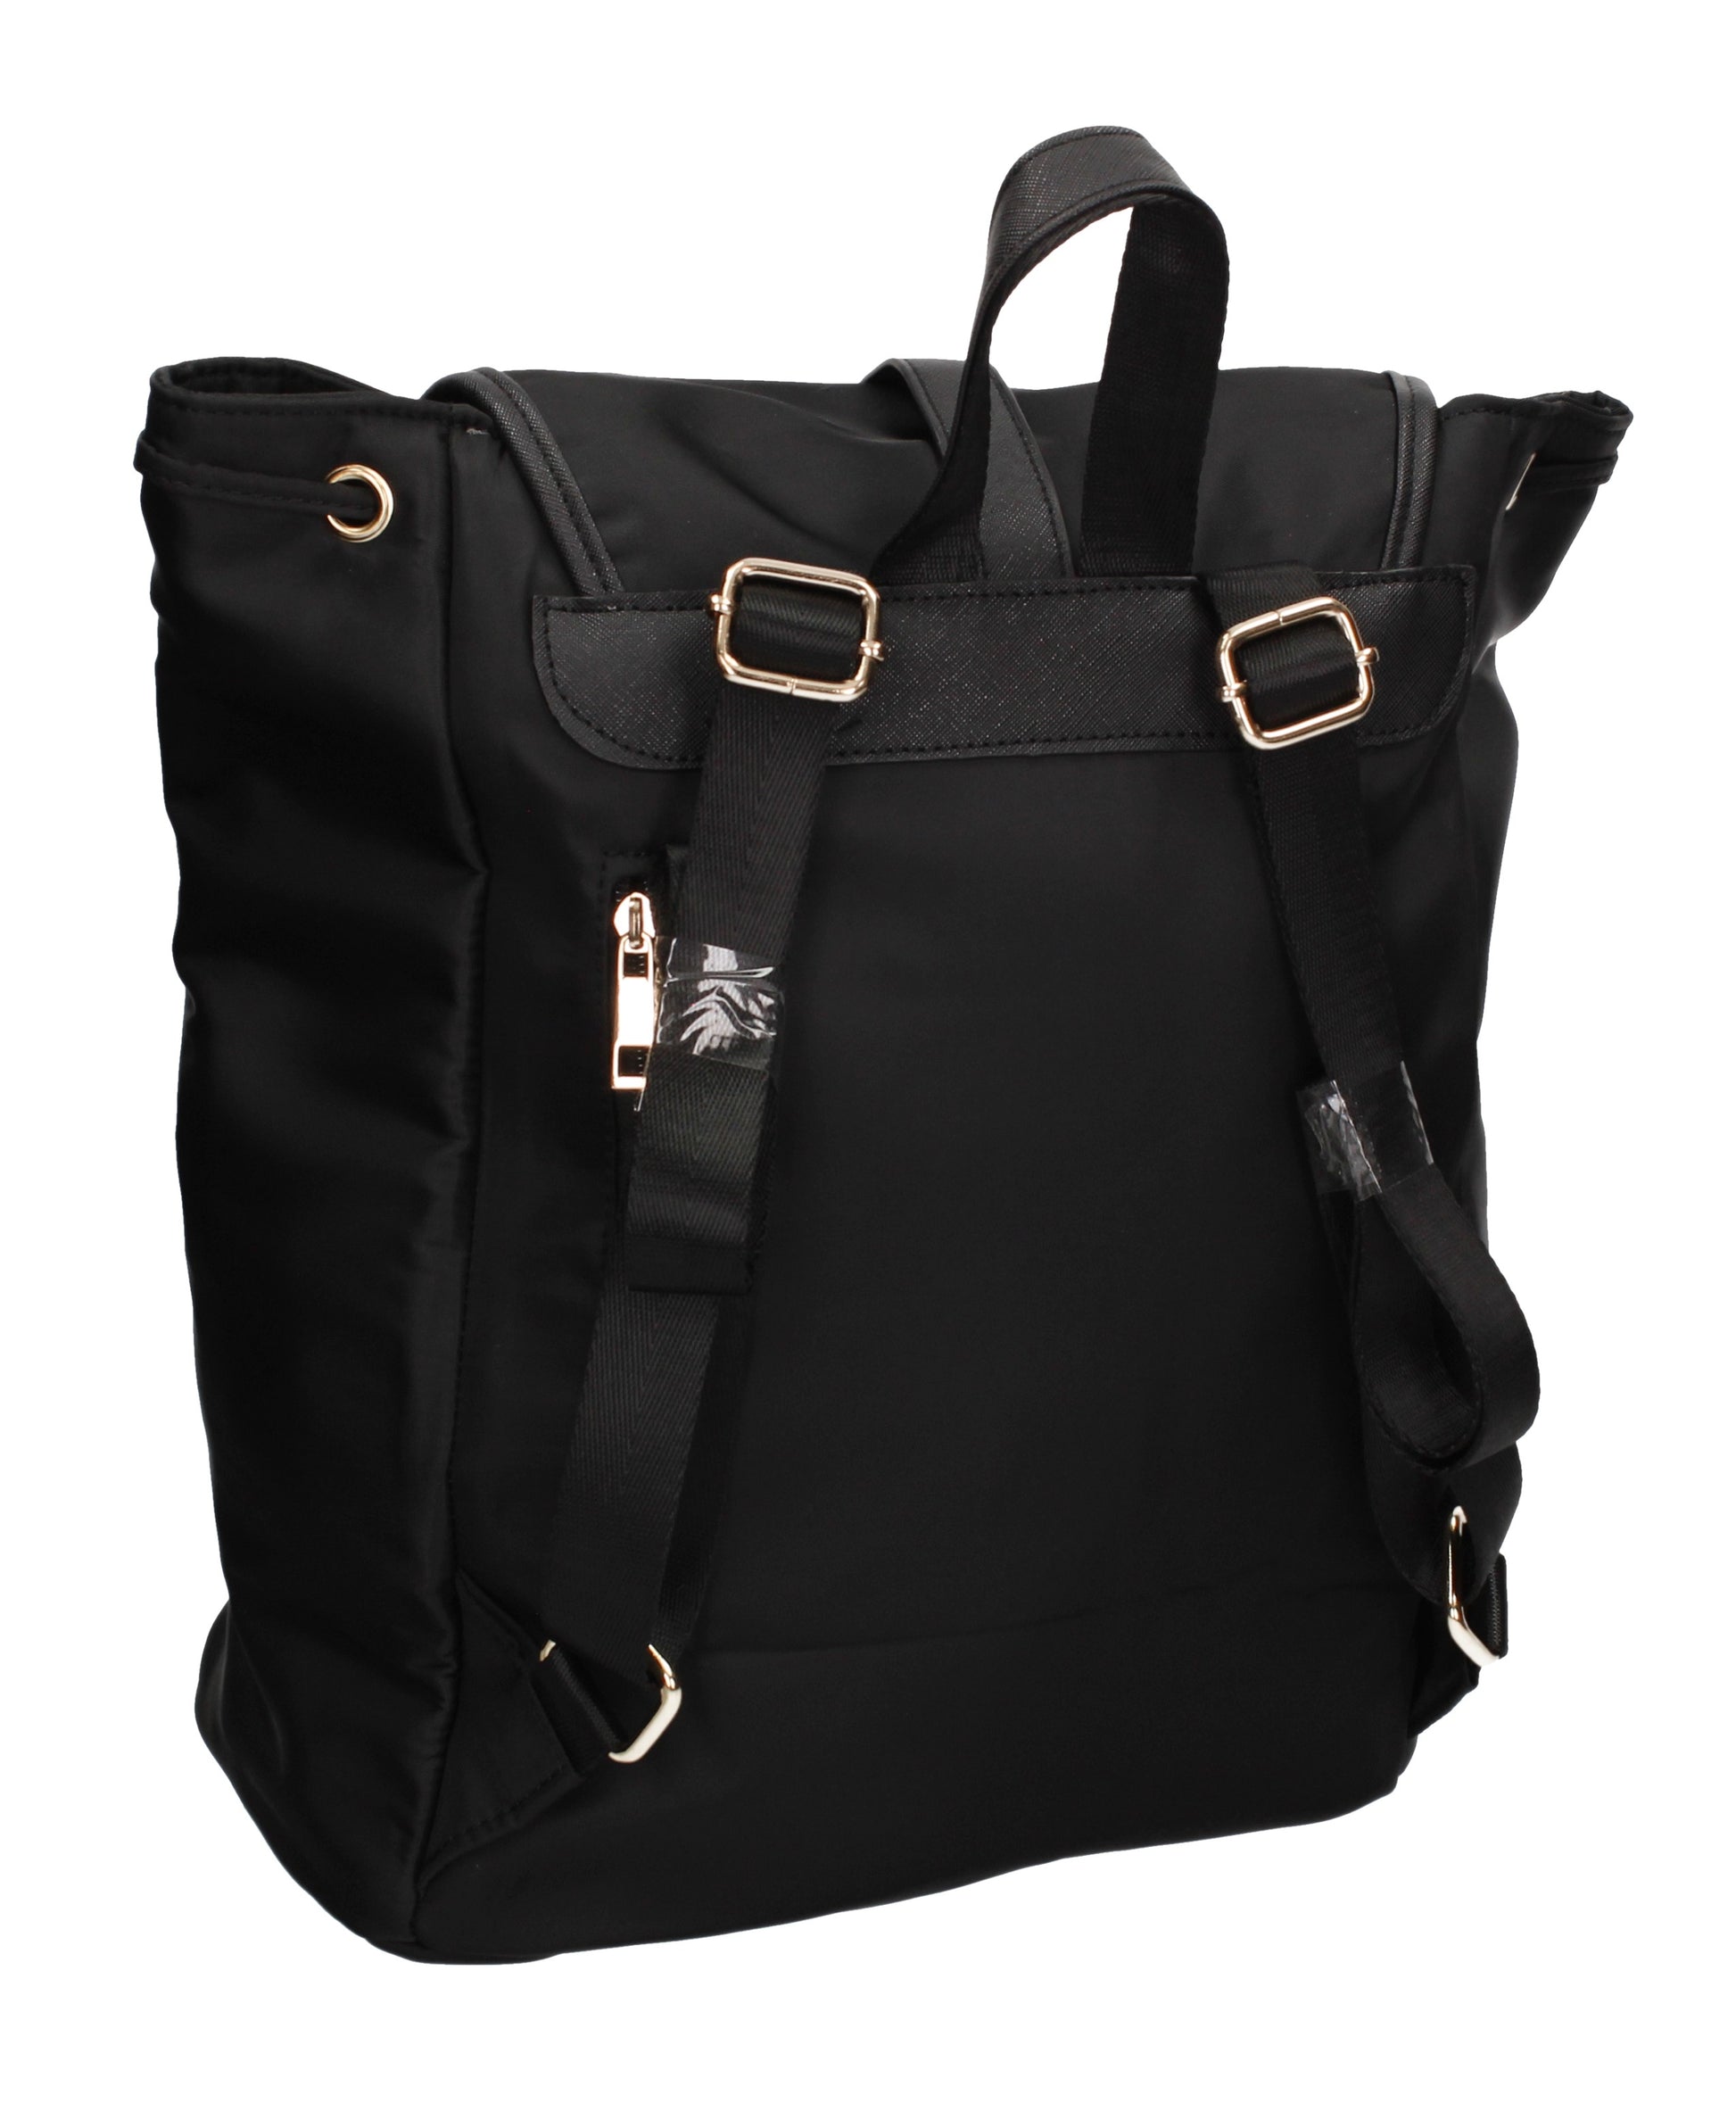 Swanky Swans Bailey Backpack Black Perfect Backpack for school!